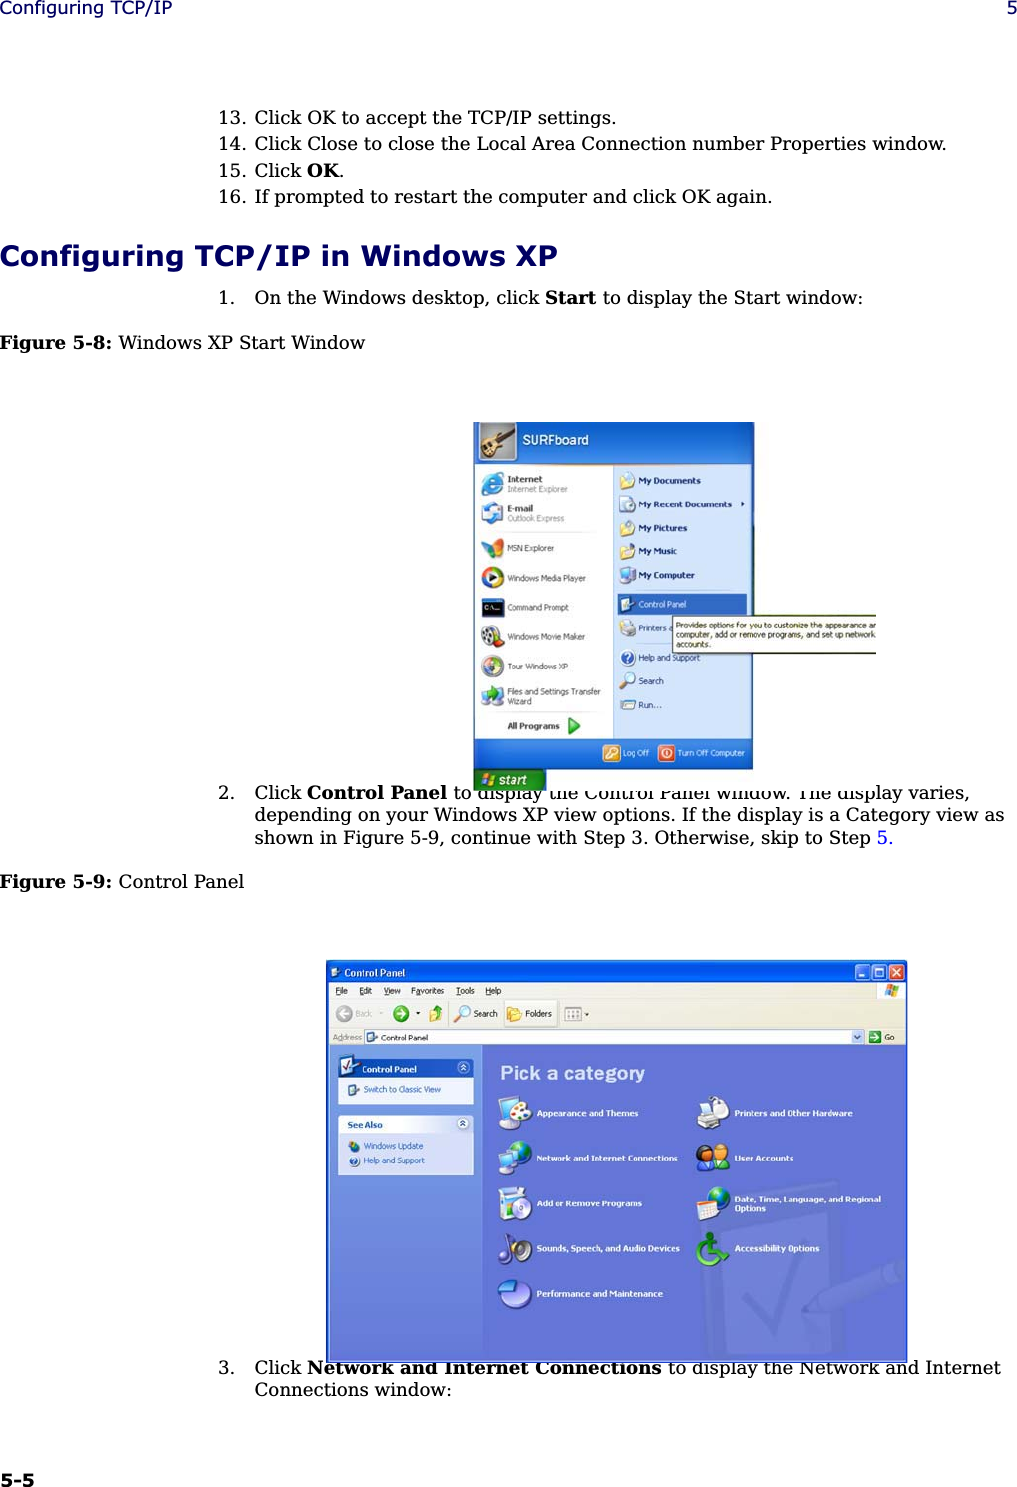 5-5Configuring TCP/IP 513. Click OK to accept the TCP/IP settings.14. Click Close to close the Local Area Connection number Properties window.15. Click OK.16. If prompted to restart the computer and click OK again.Configuring TCP/IP in Windows XP1. On the Windows desktop, click Start to display the Start window:Figure 5-8: Windows XP Start Window2. Click Control Panel to display the Control Panel window. The display varies, depending on your Windows XP view options. If the display is a Category view as shown in Figure 5-9, continue with Step 3. Otherwise, skip to Step 5.Figure 5-9: Control Panel3. Click Network and Internet Connections to display the Network and Internet Connections window: